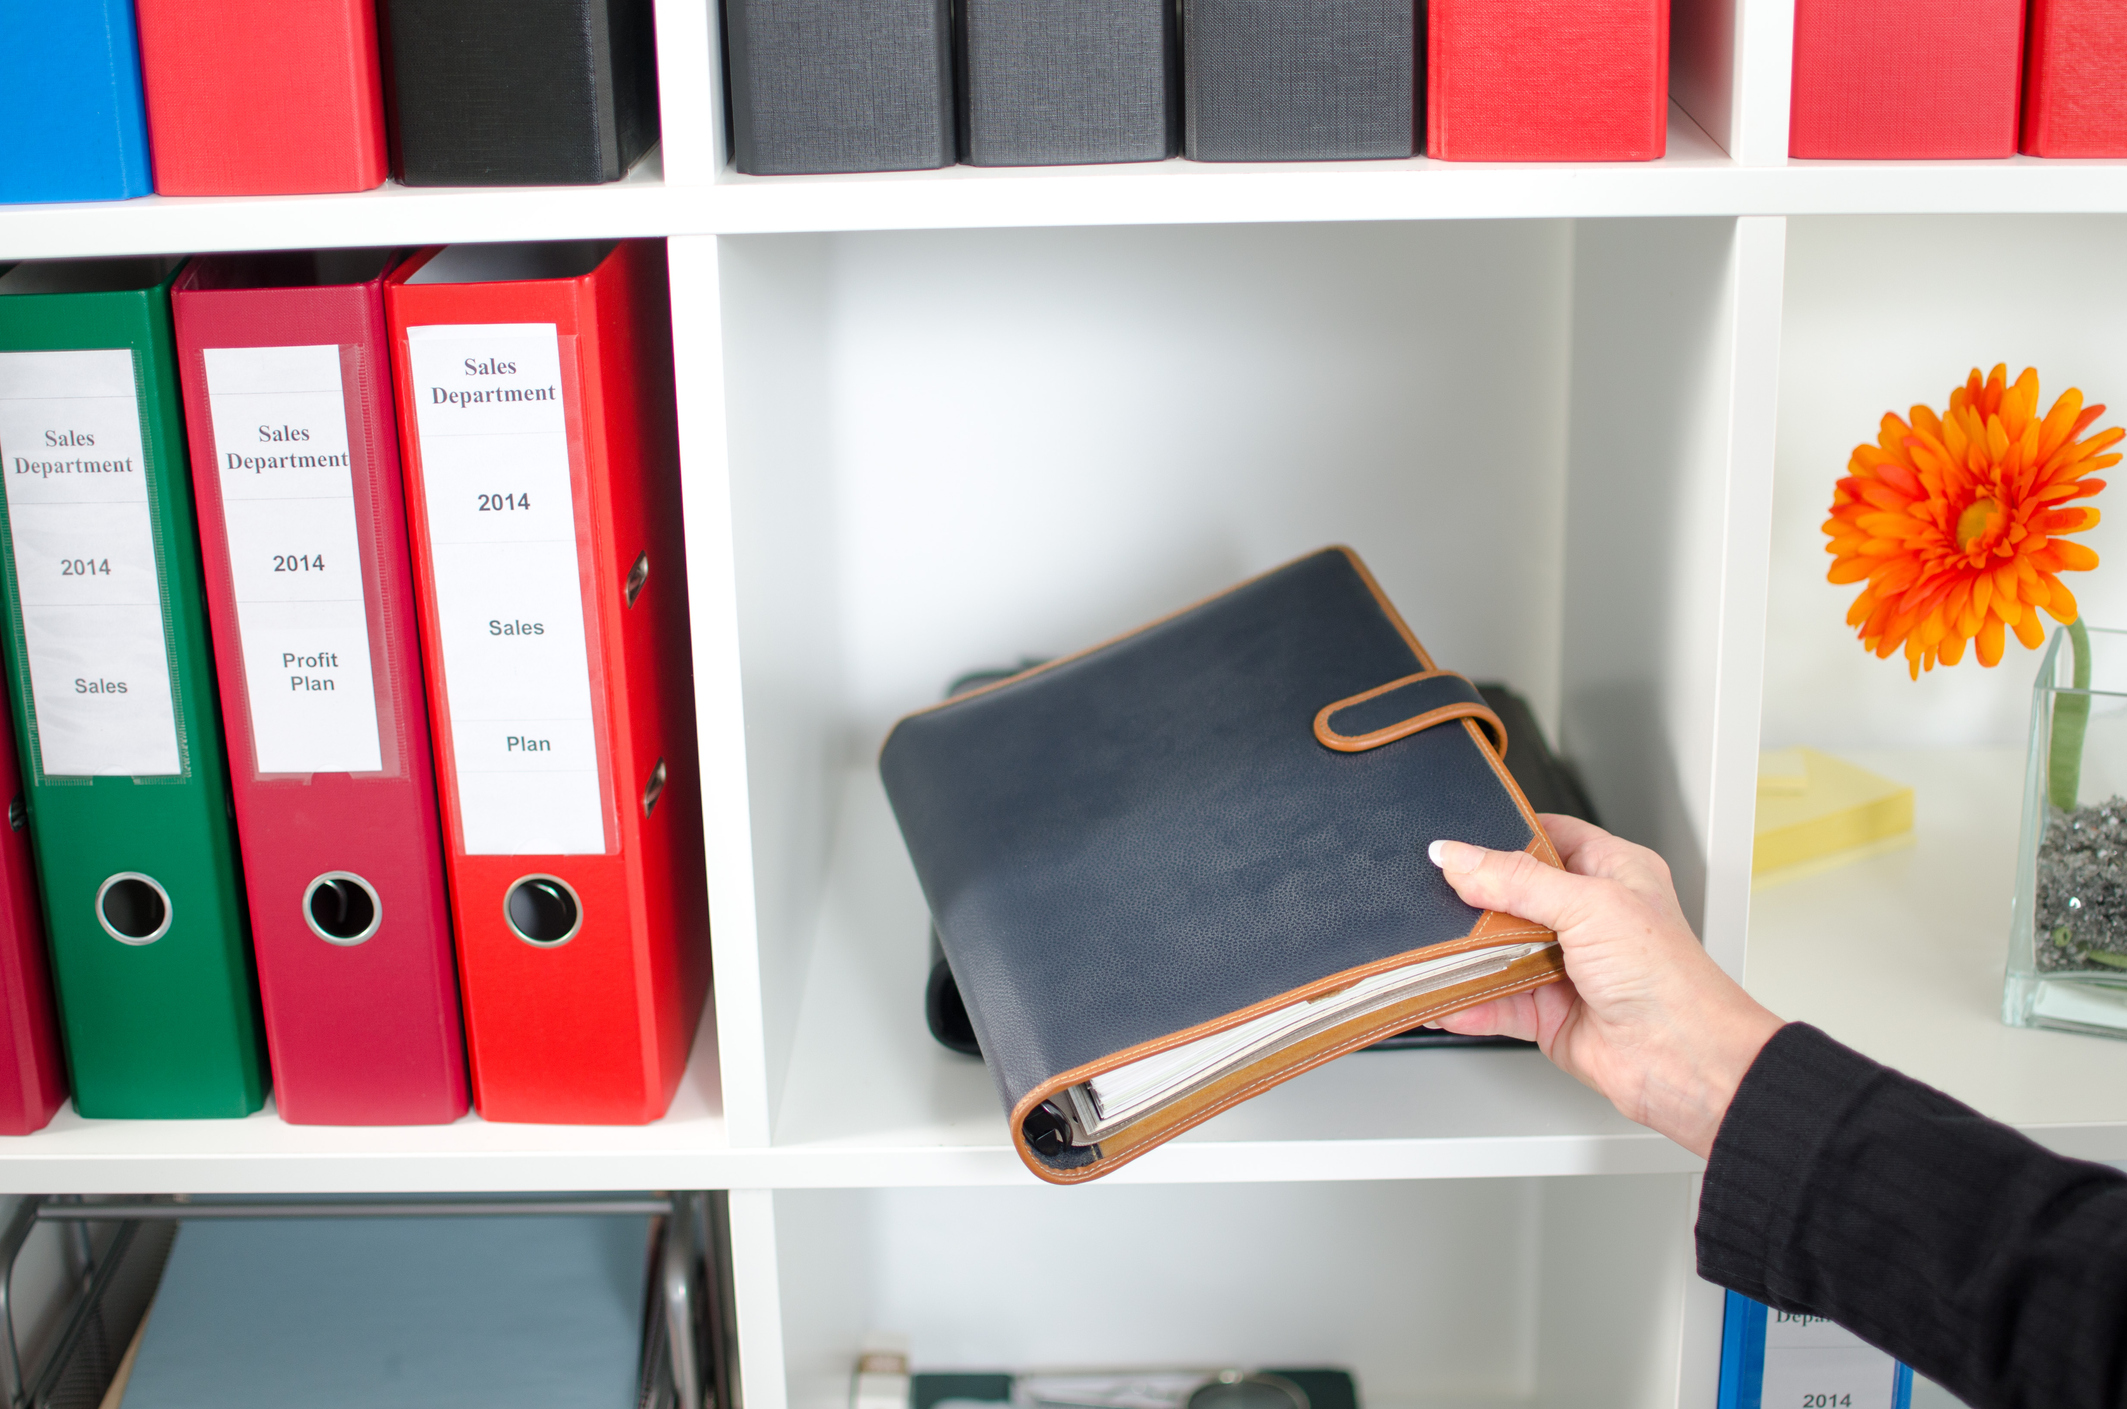 Businesswoman in office putting a diary in a shelf. PR pros can stay organized with these three tips.